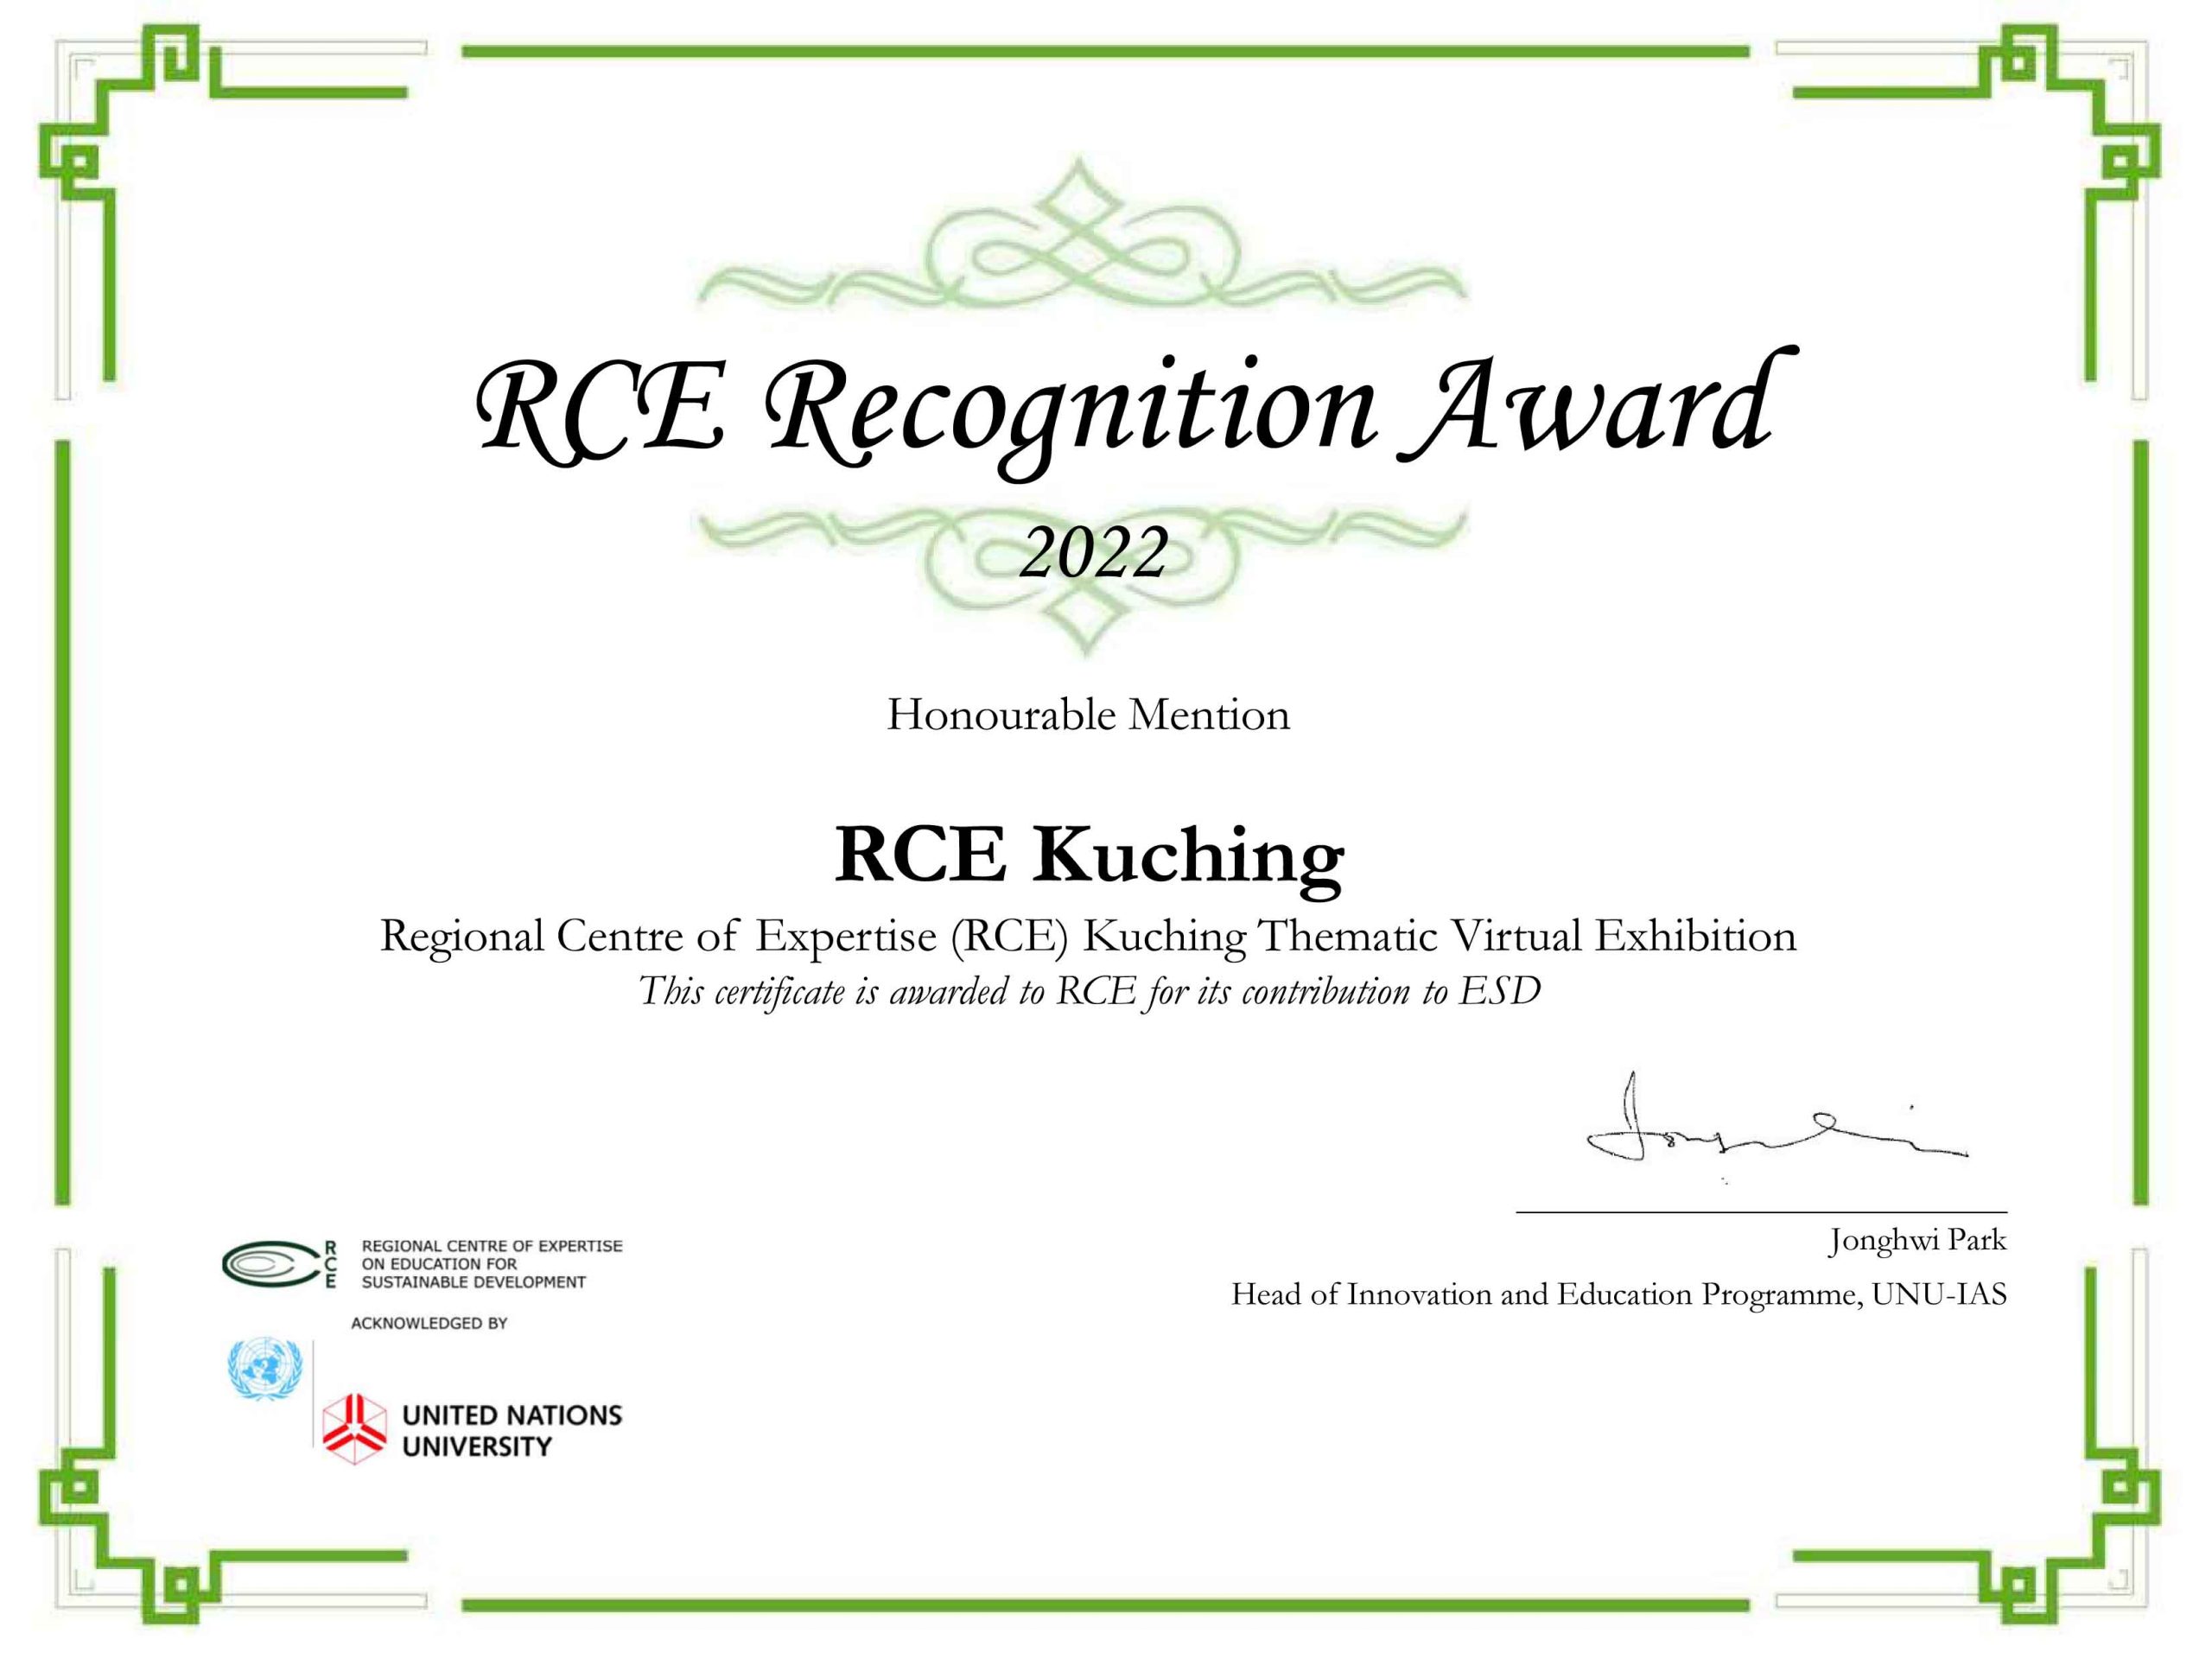 Microsoft PowerPoint - RCE Recognition Award Certificates_2022_H